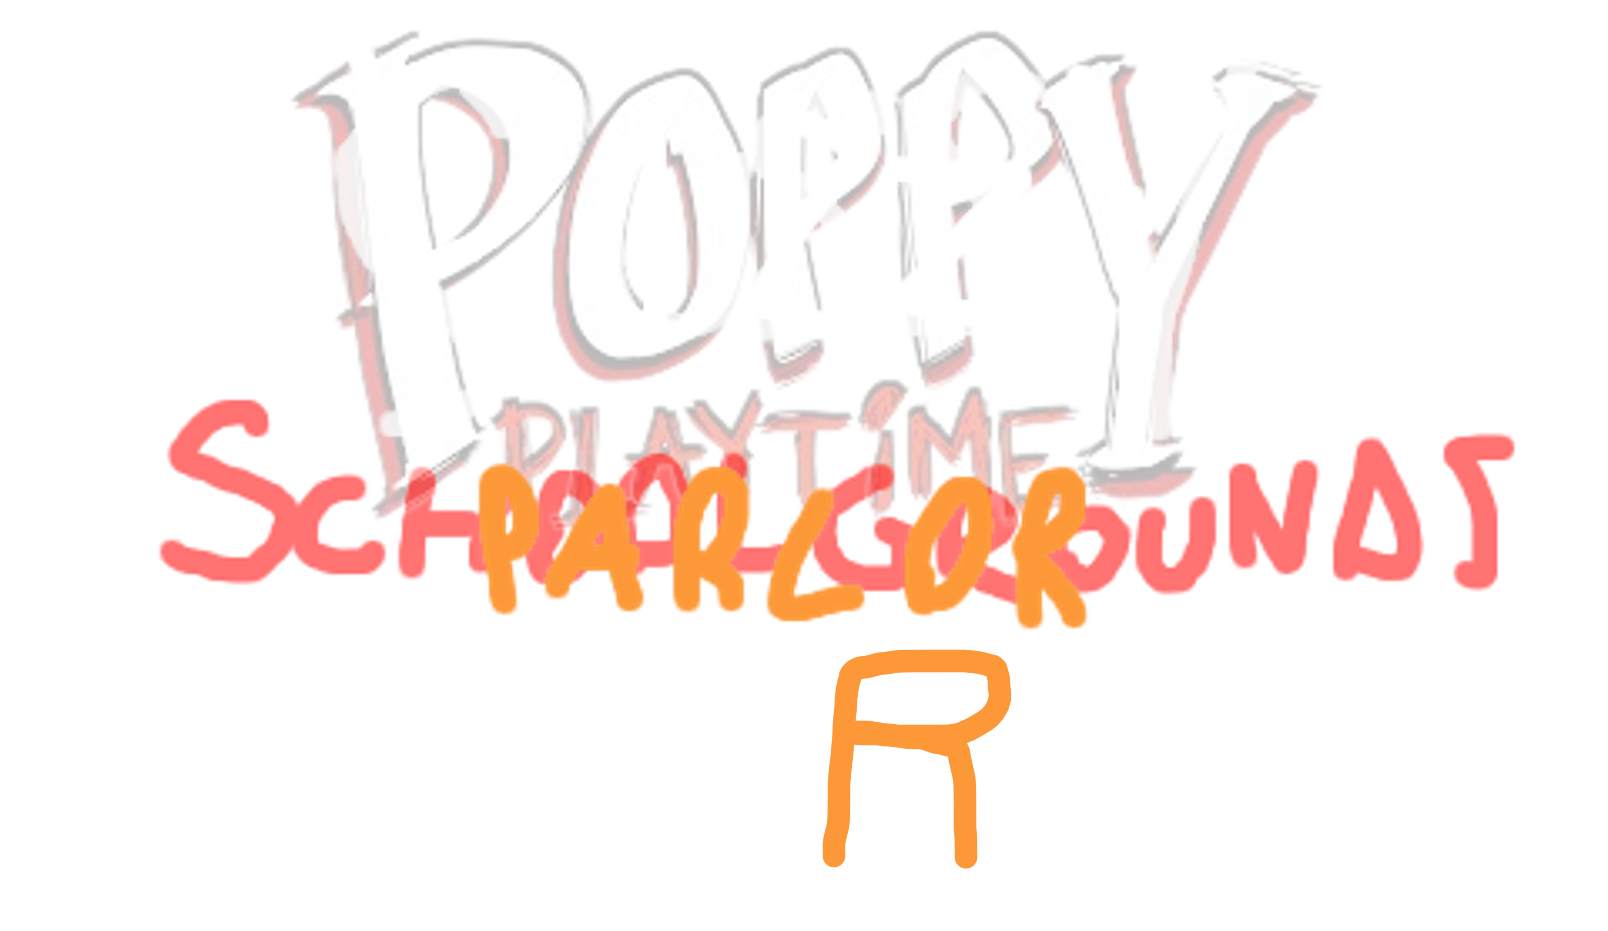 pizzy's parlor vr